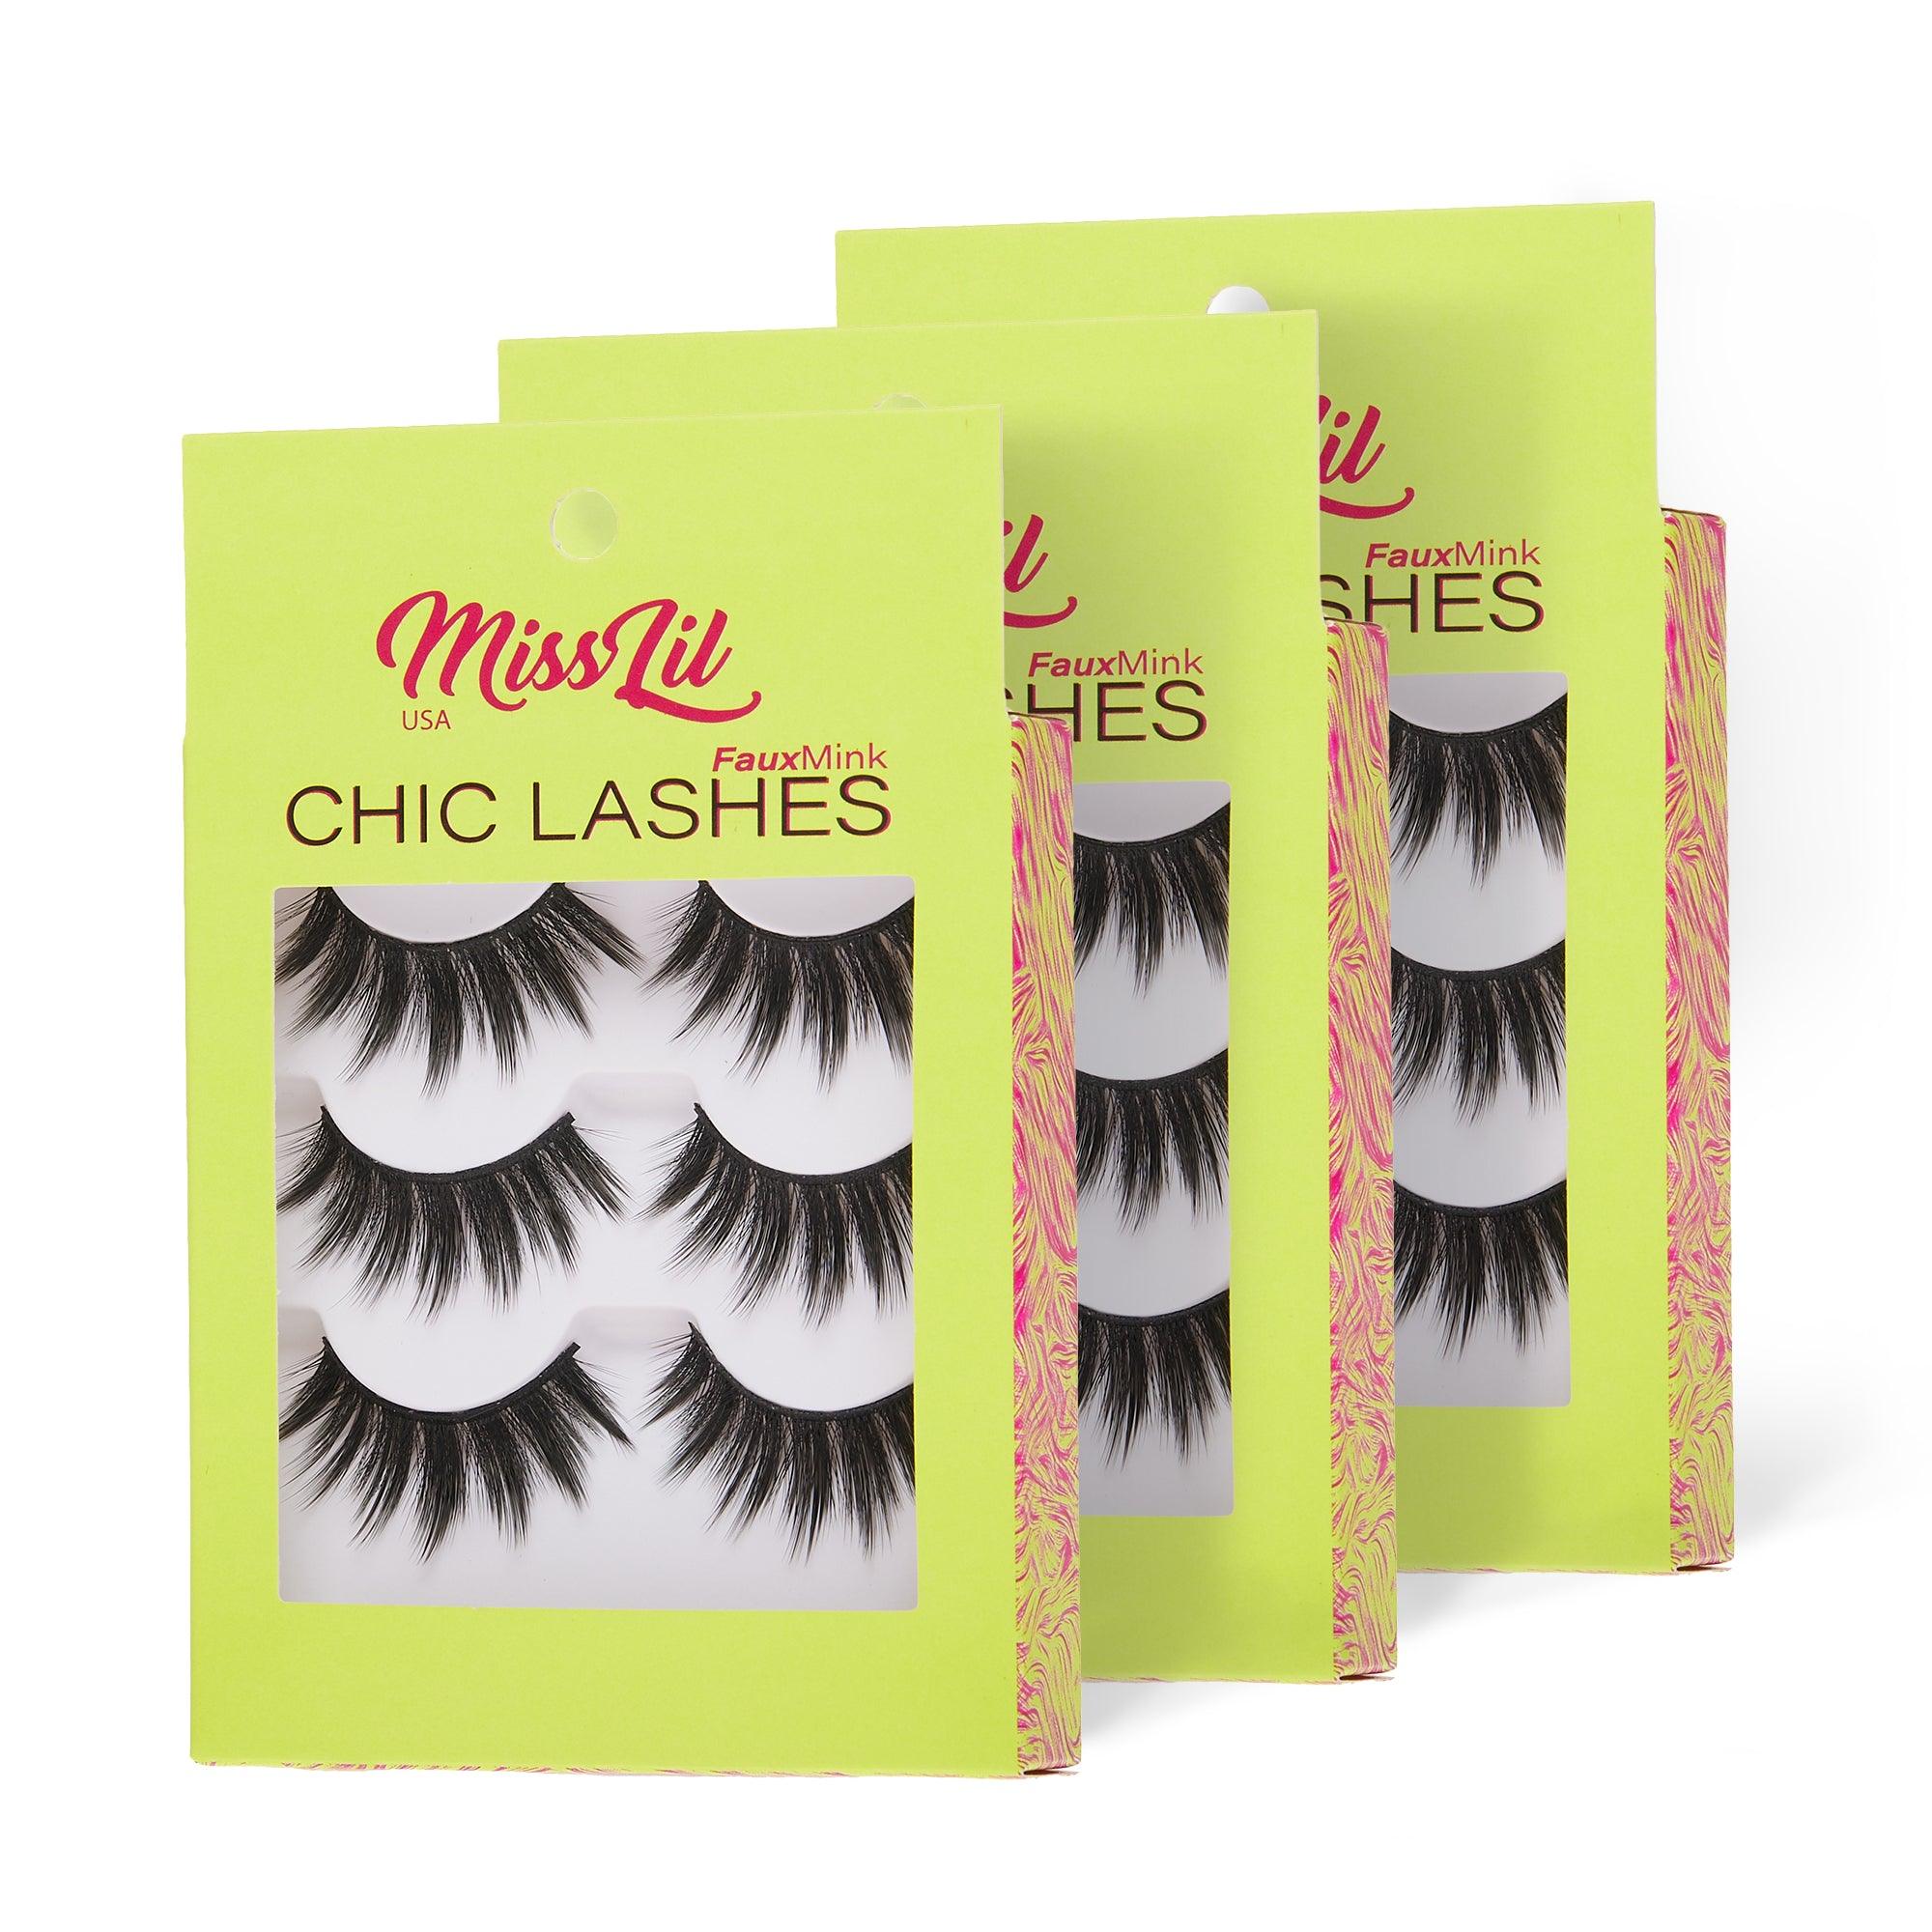 3-Pairs Lashes-Chic Lashes Collection #19 (Pack of 12) - Miss Lil USA Wholesale